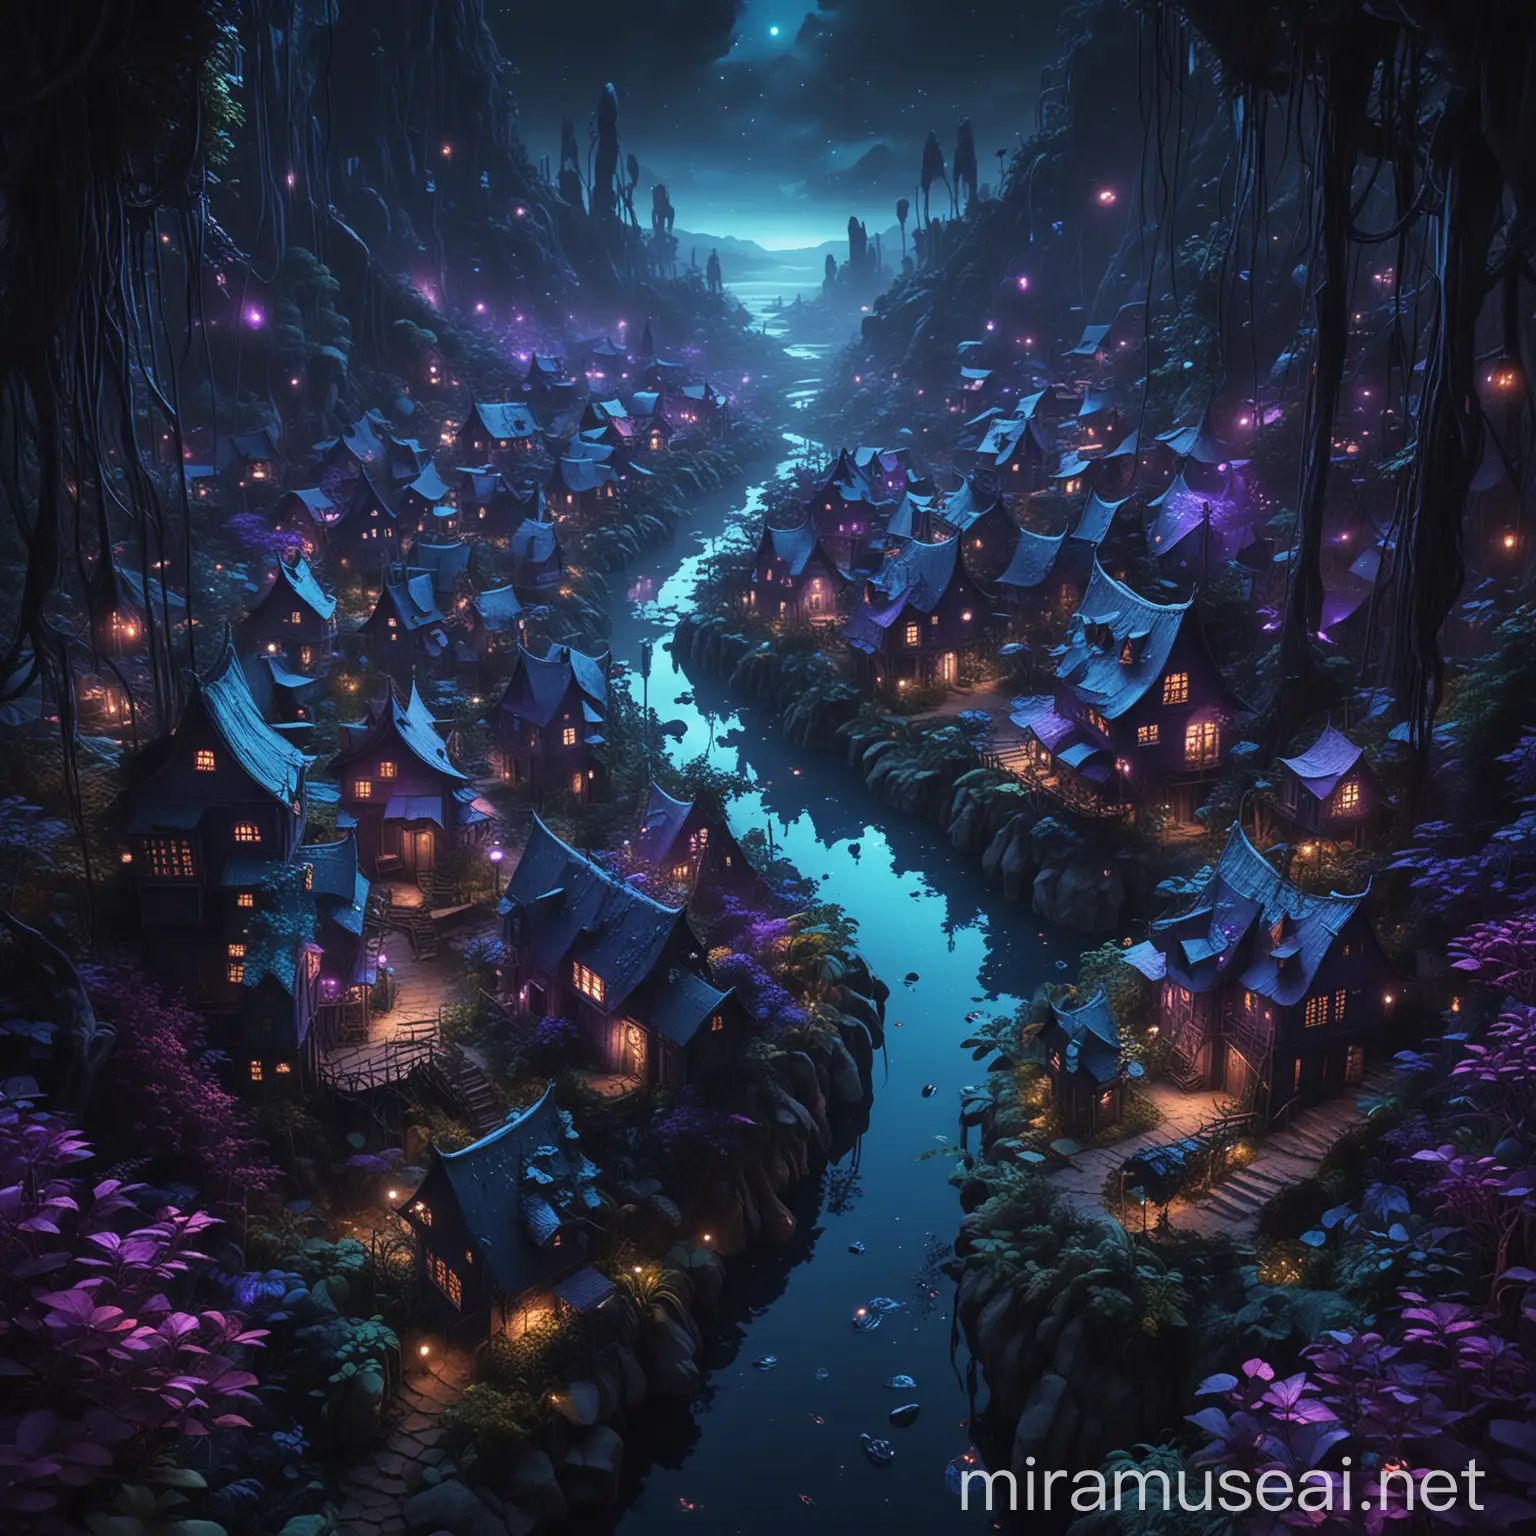 dark fantasy style, arial view of a village, many abstract fantasy houses mimicking interesting shapes and plants, surrounded by giant bioluminescent plants, eternal darkness, firefly particles, tall trees, purple and blue indoor lights, fantasy forest setting